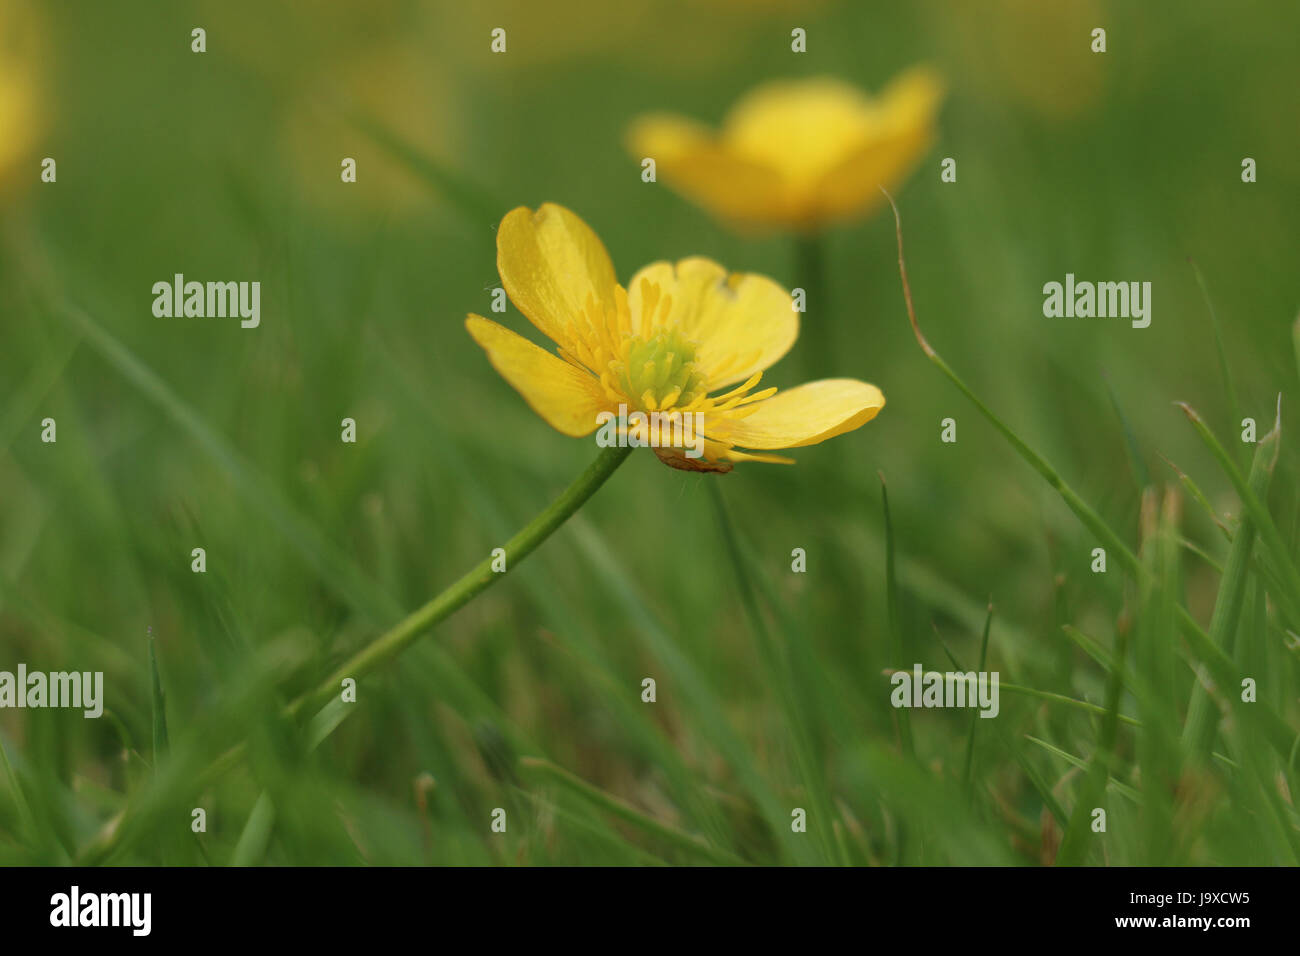 Yellow Creeping Buttercup Flower, Ranunculus repens, blooming in the summer sun on a natural green grass background. Stock Photo